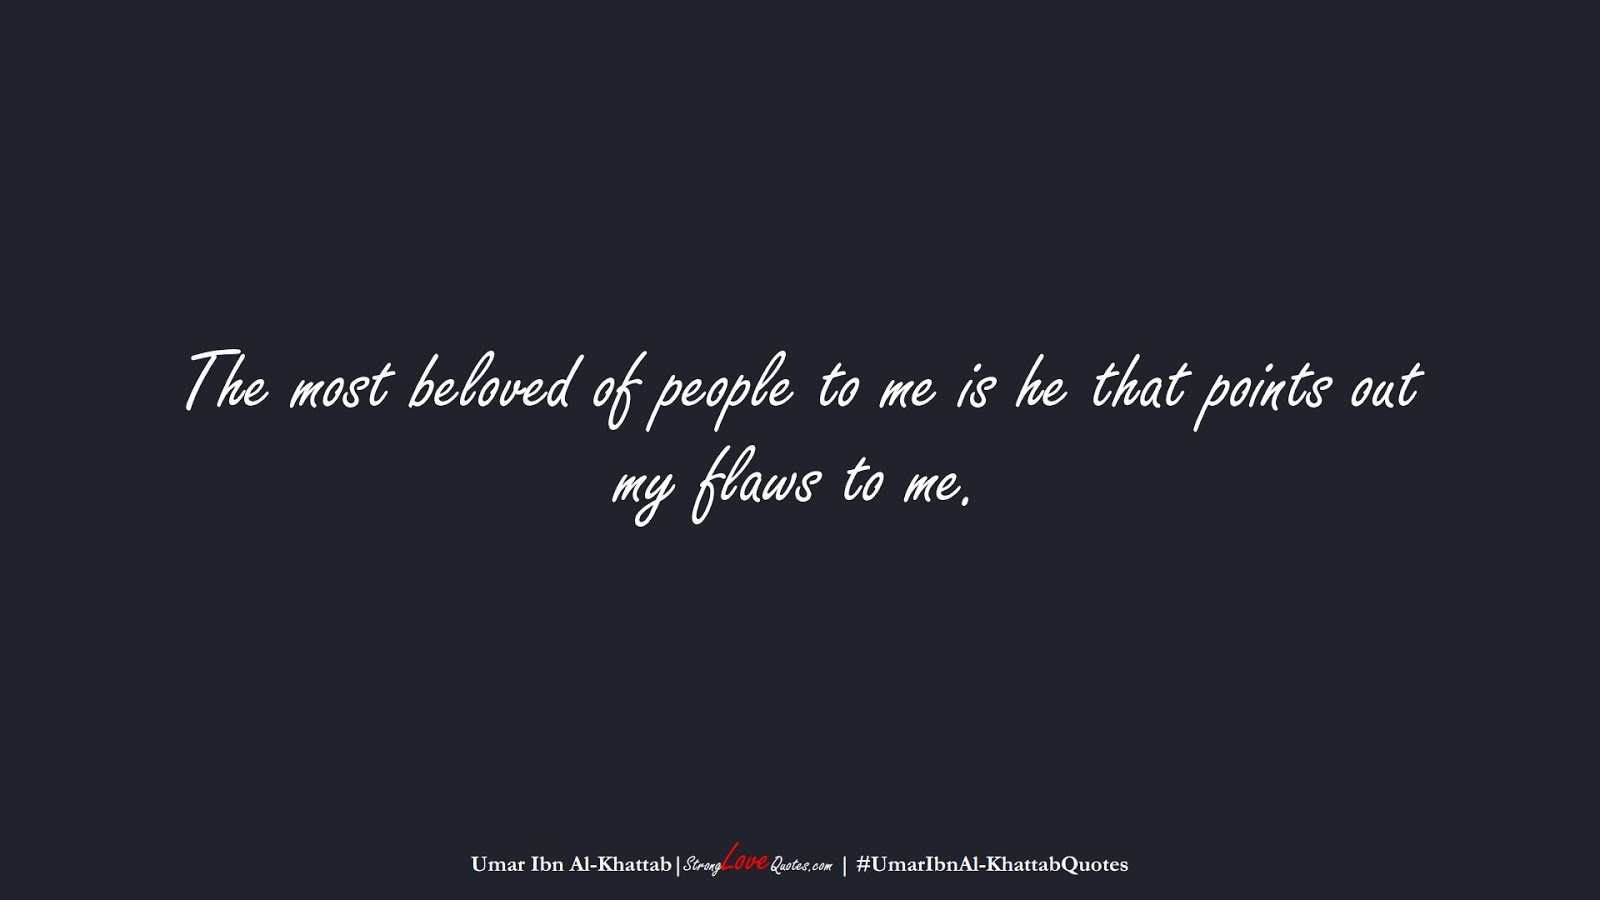 The most beloved of people to me is he that points out my flaws to me. (Umar Ibn Al-Khattab);  #UmarIbnAl-KhattabQuotes